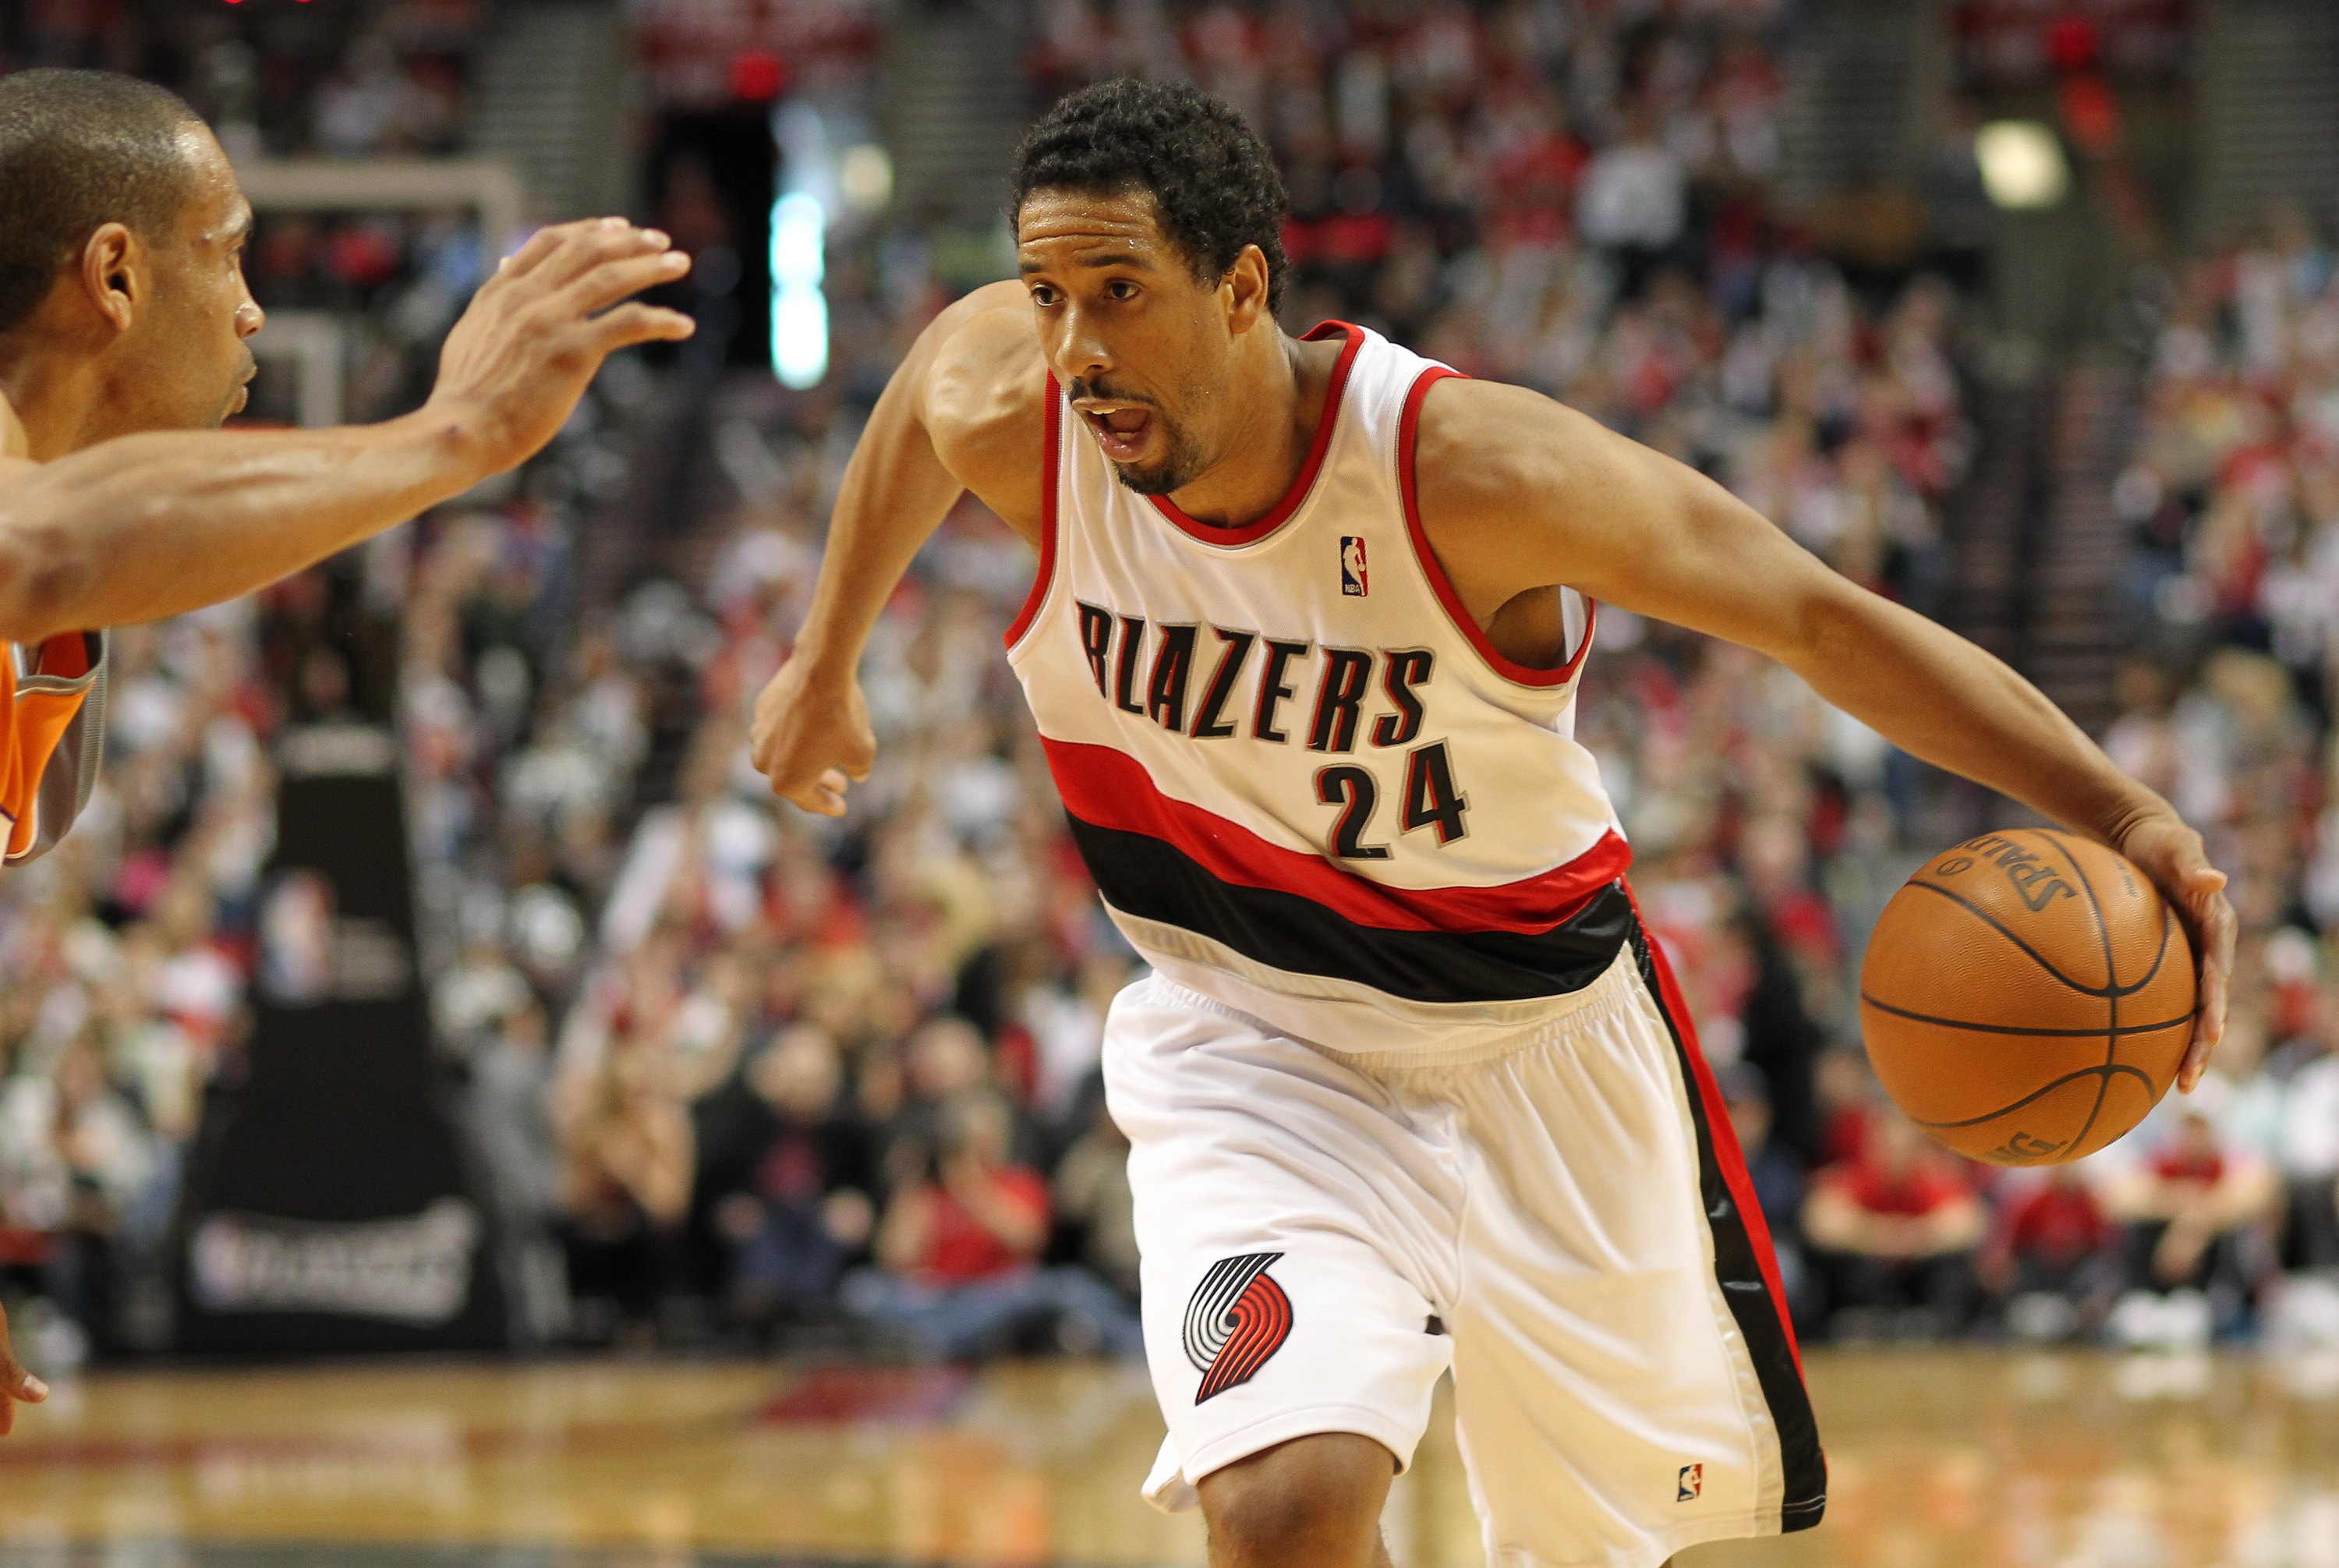 PORTLAND, OR - APRIL 24:  Andre Miller #24 of the Portland Trail Blazers drives against the Phoenix Suns during Game Four of the Western Conference Quarterfinals of the NBA Playoffs on April 24, 2010 at the Rose Garden in Portland, Oregon. NOTE TO USER: U